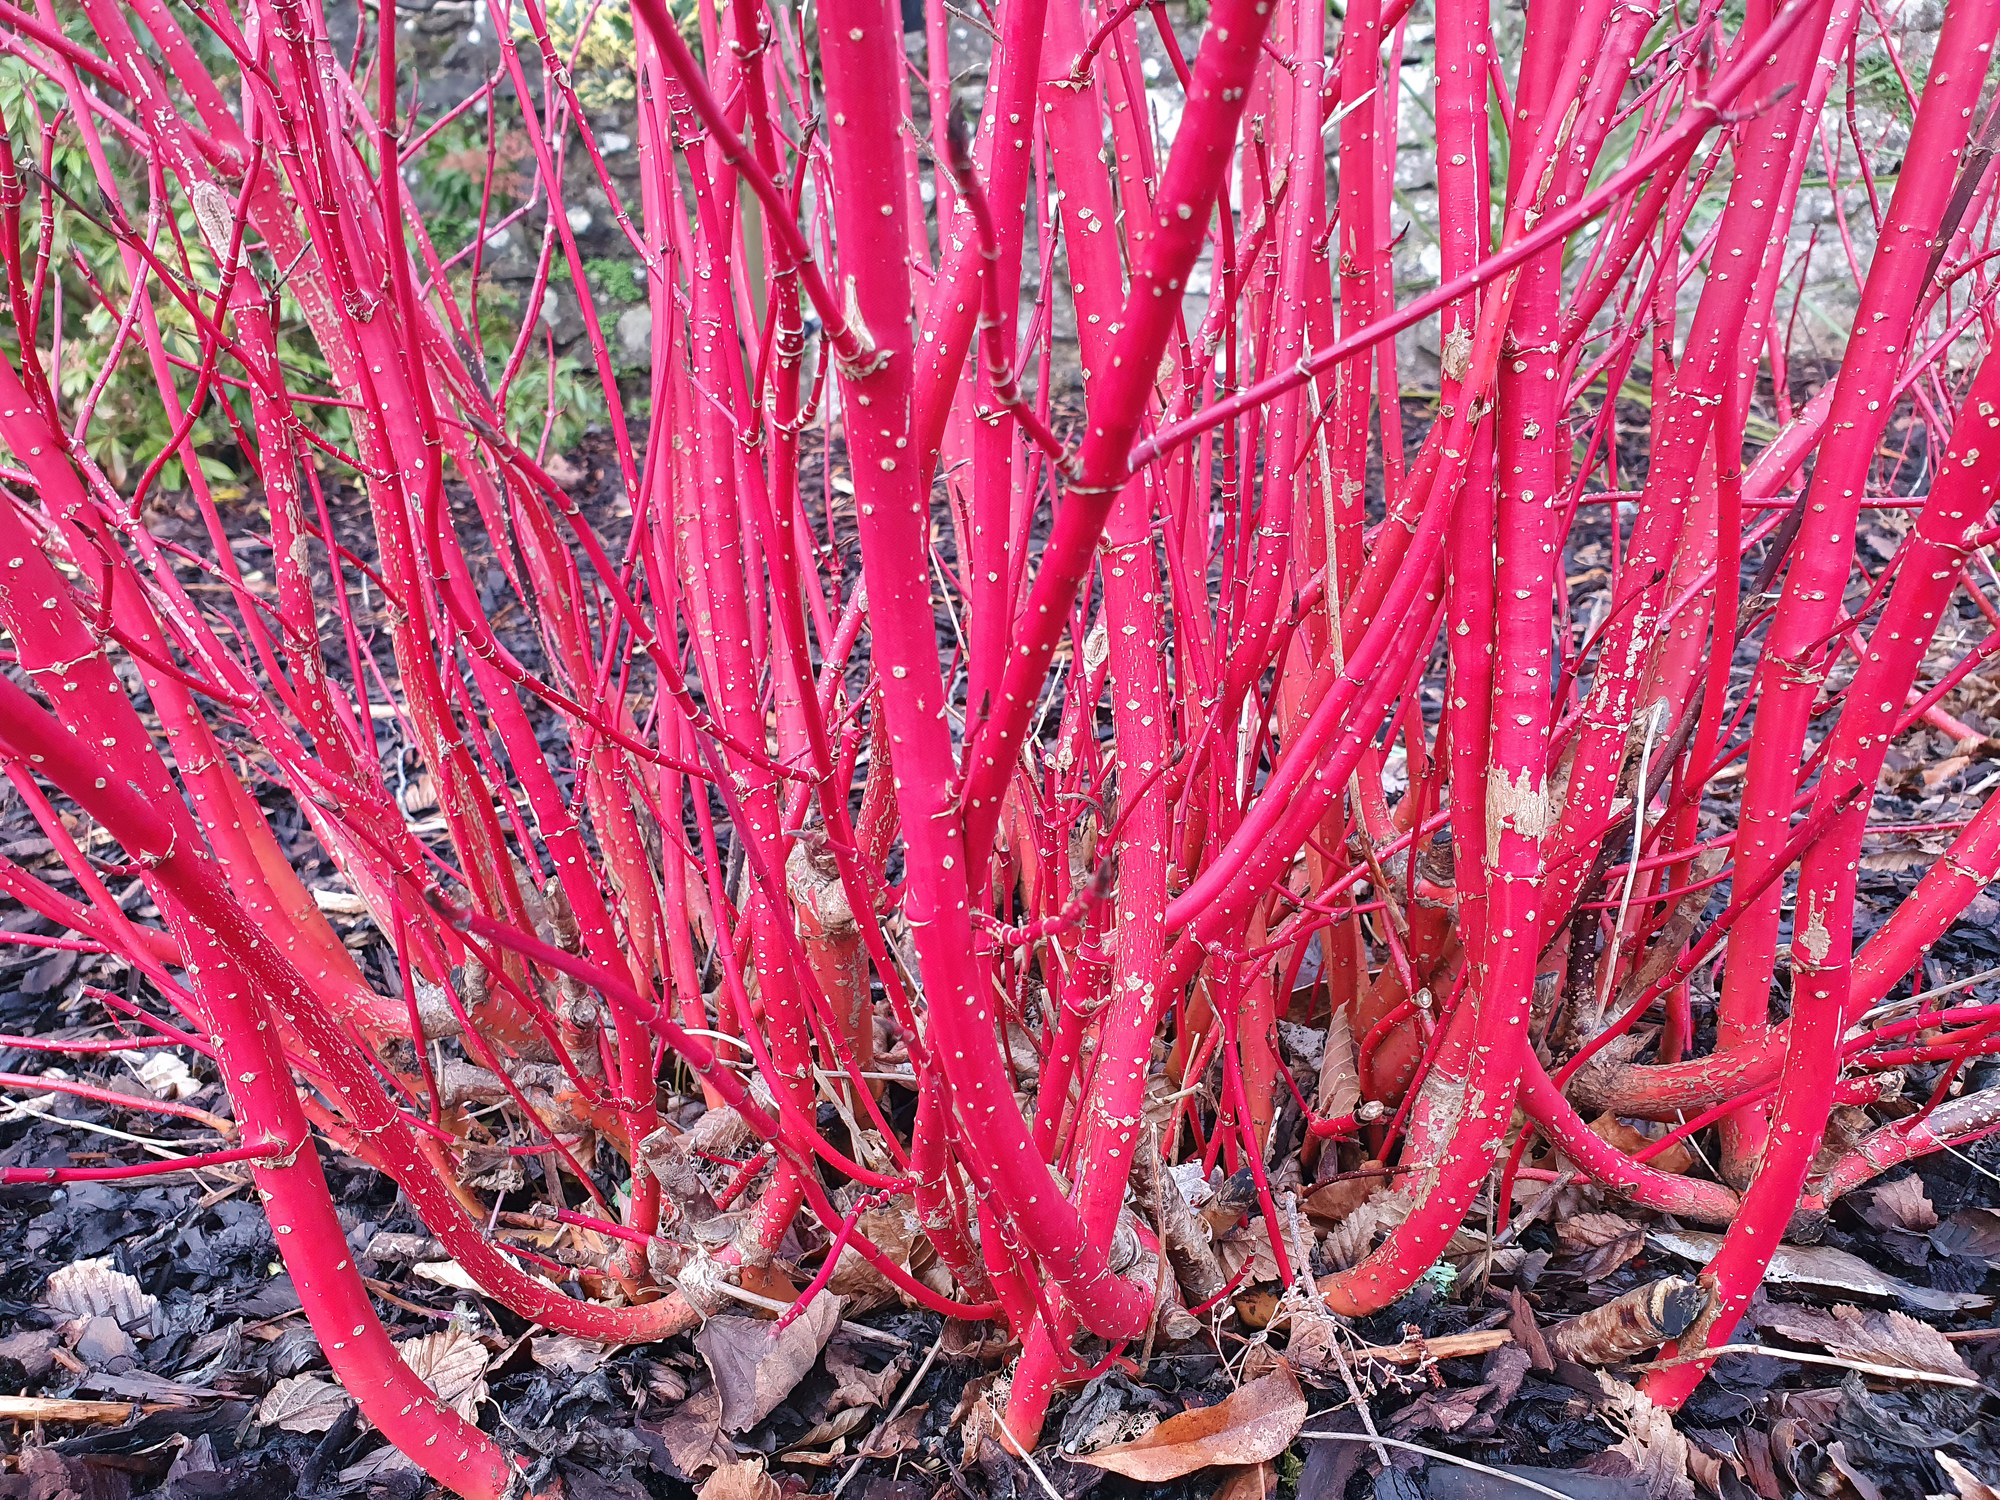 Red twig dogwood prefers full sun to partial shade.